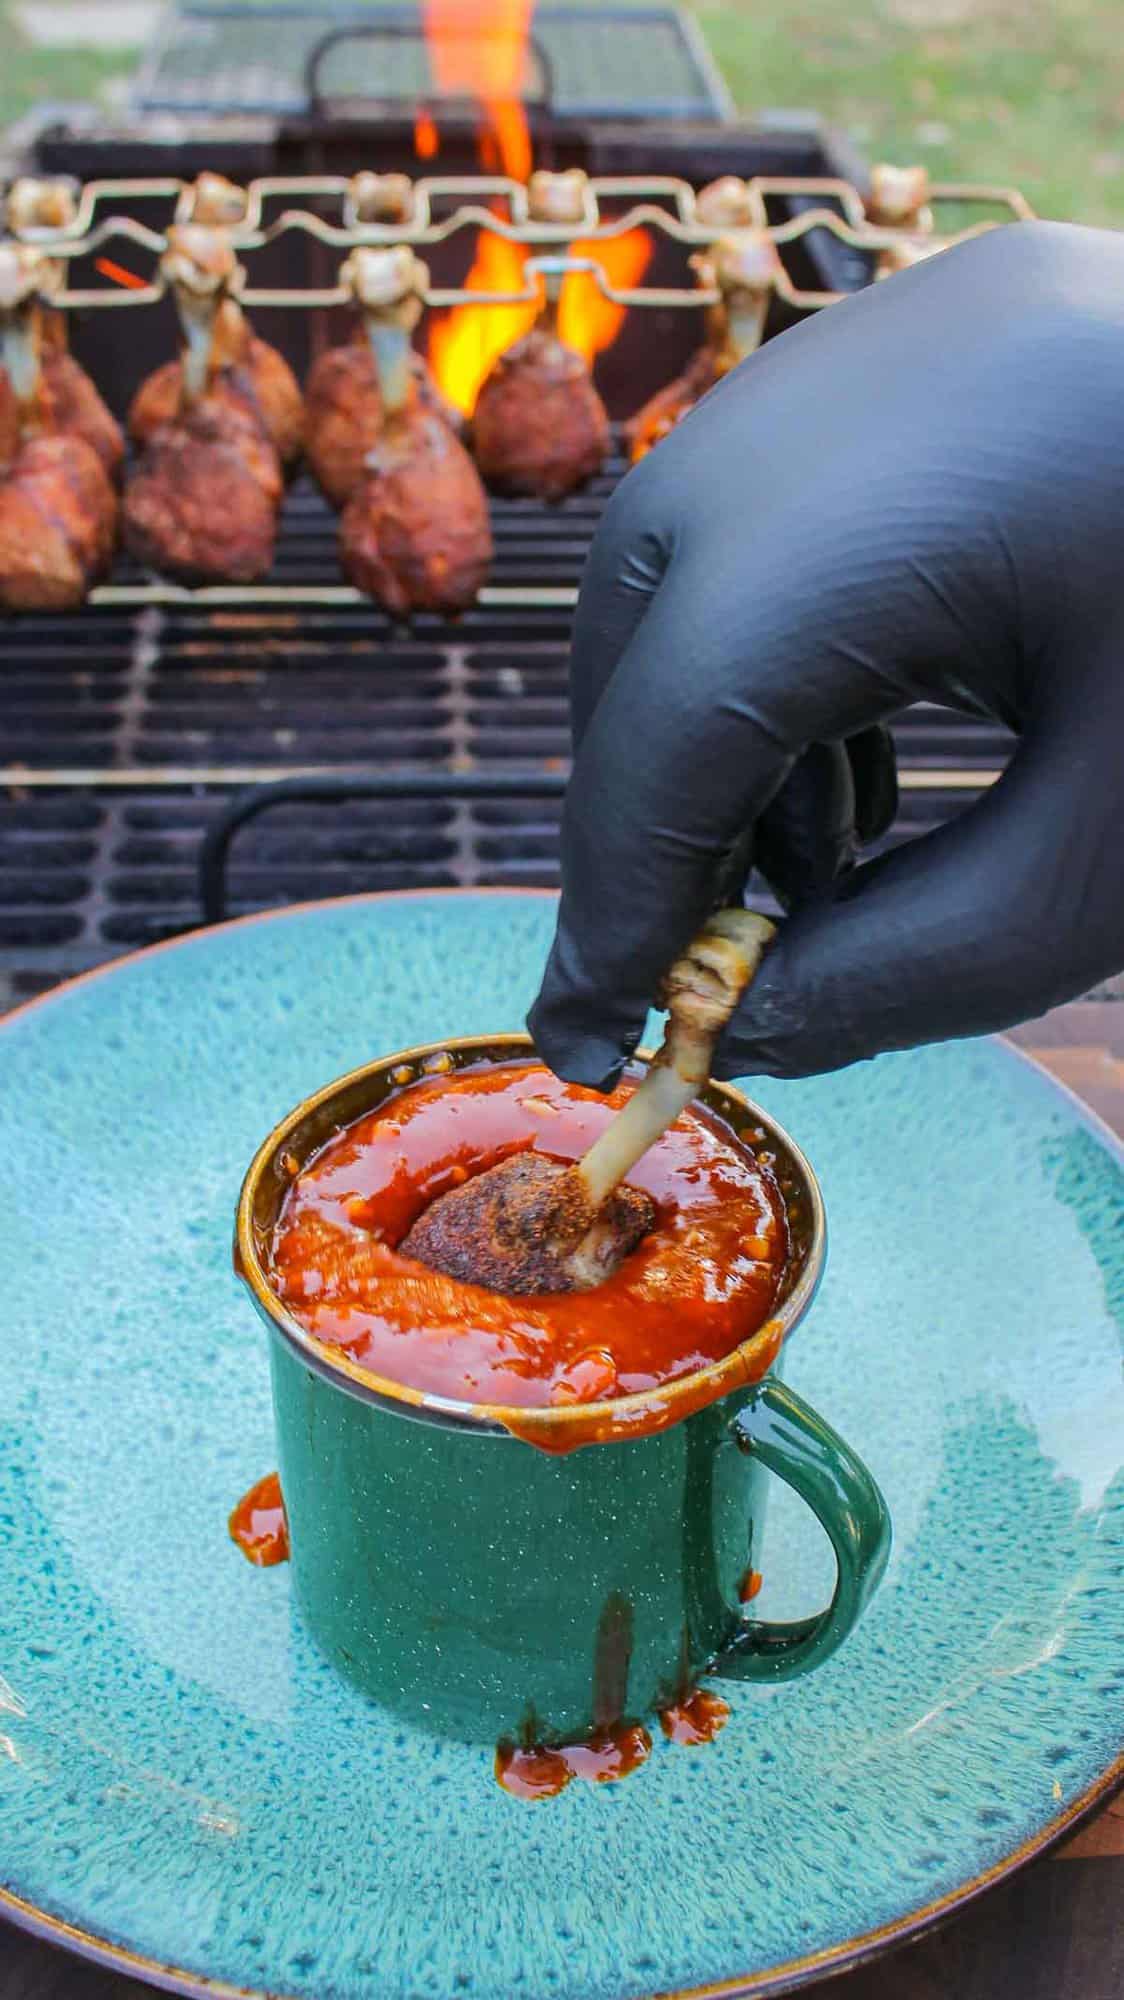 The chicken drumstick getting dunked in its sauce.